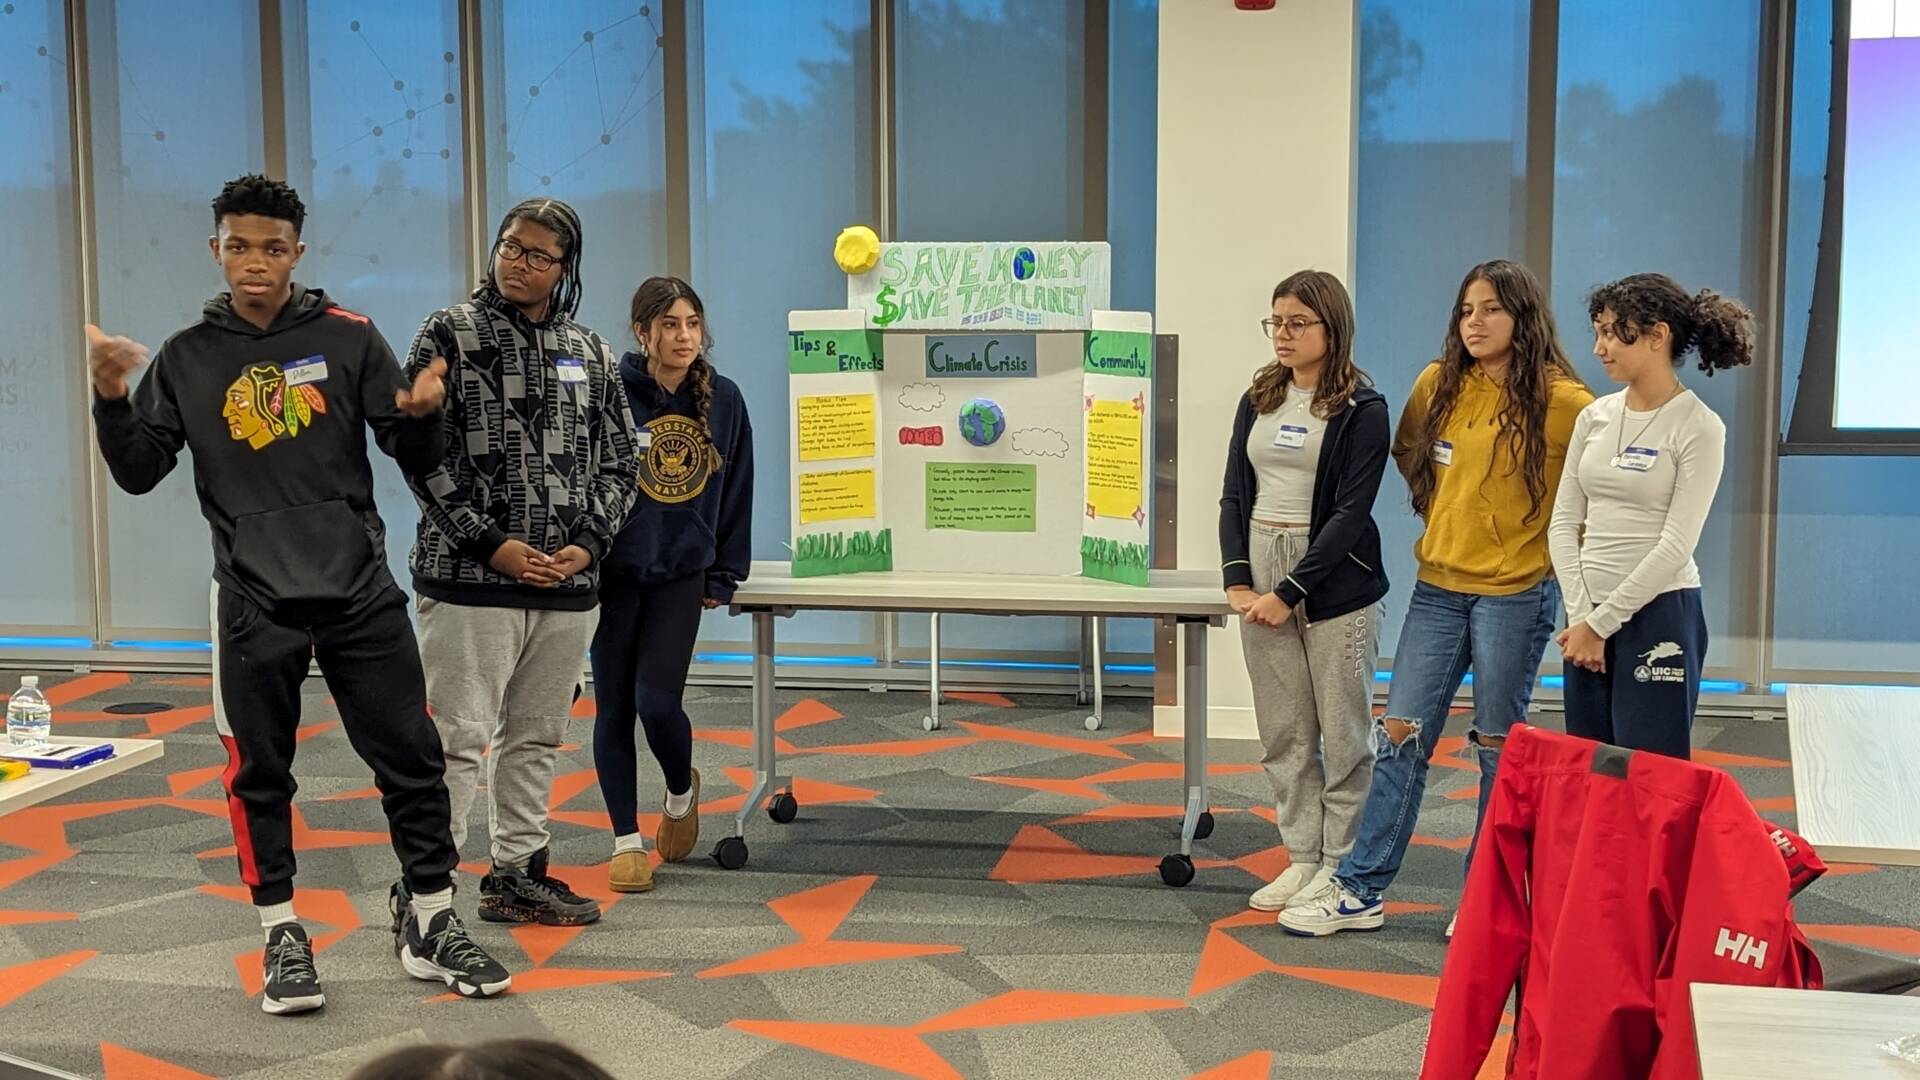 Students presenting a project